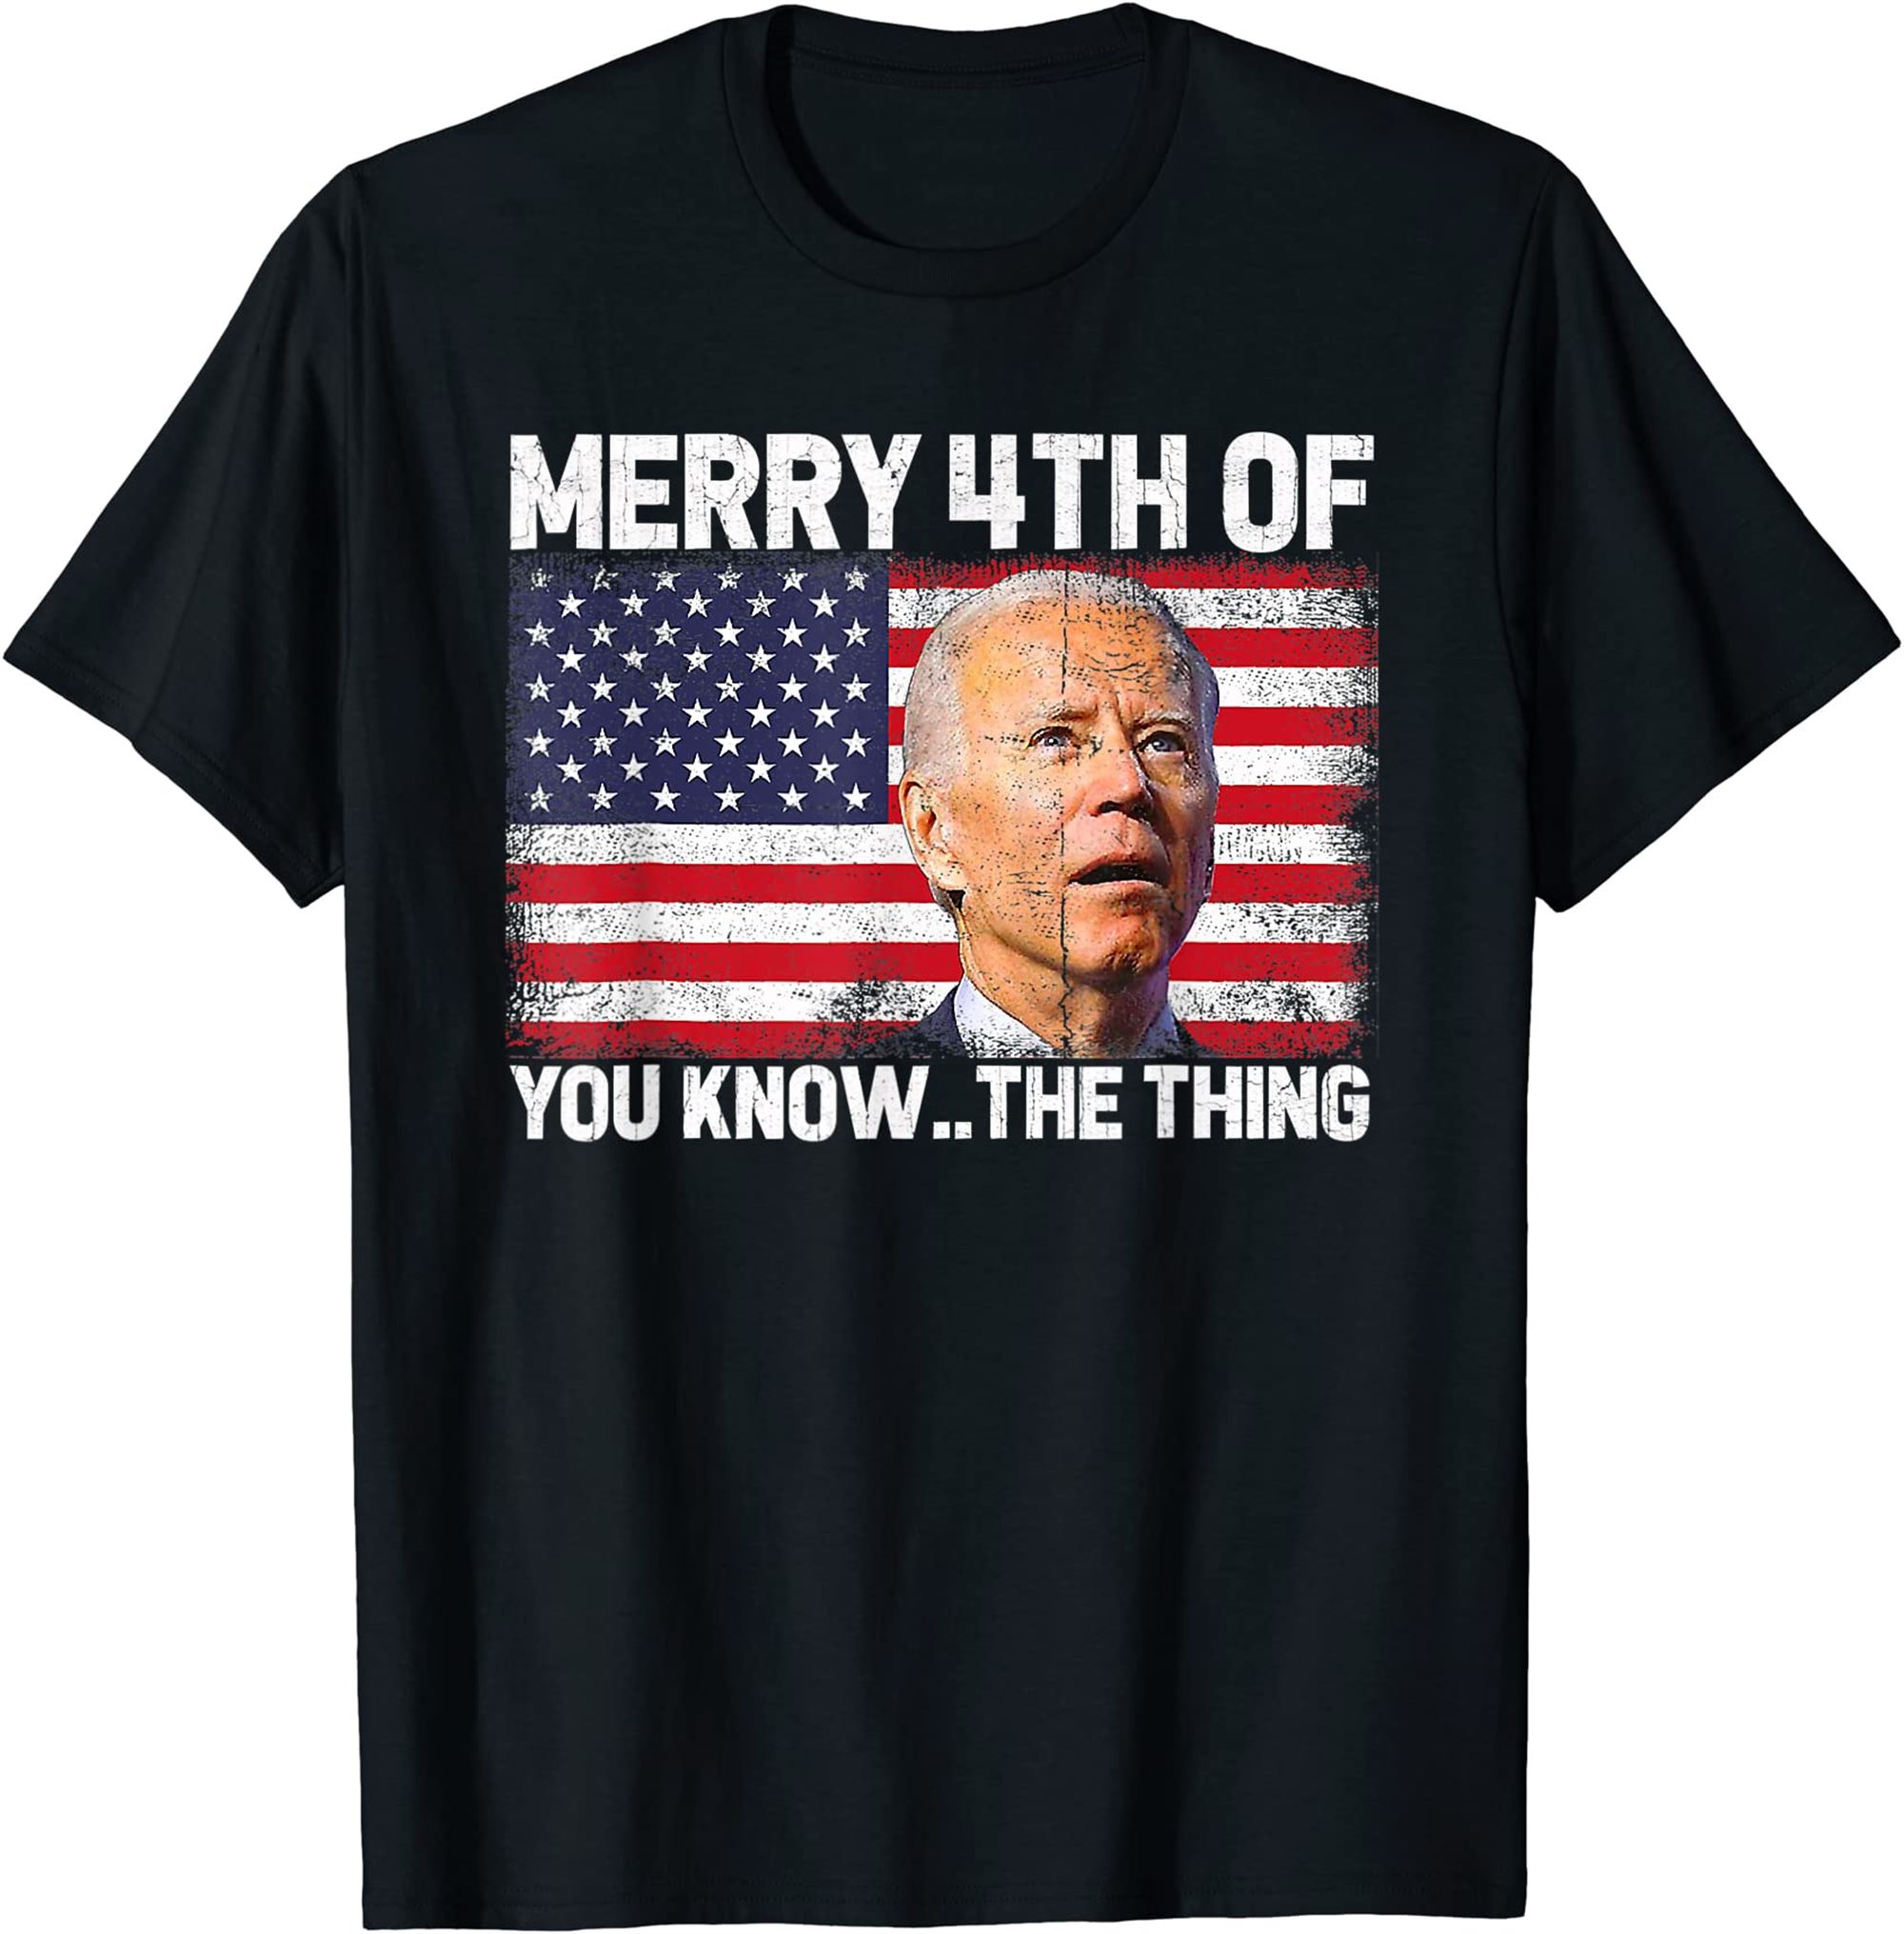 Merry 4th Of You Know The Thing Biden Meme 4th Of July T-shirt Full Size Up To 5xl